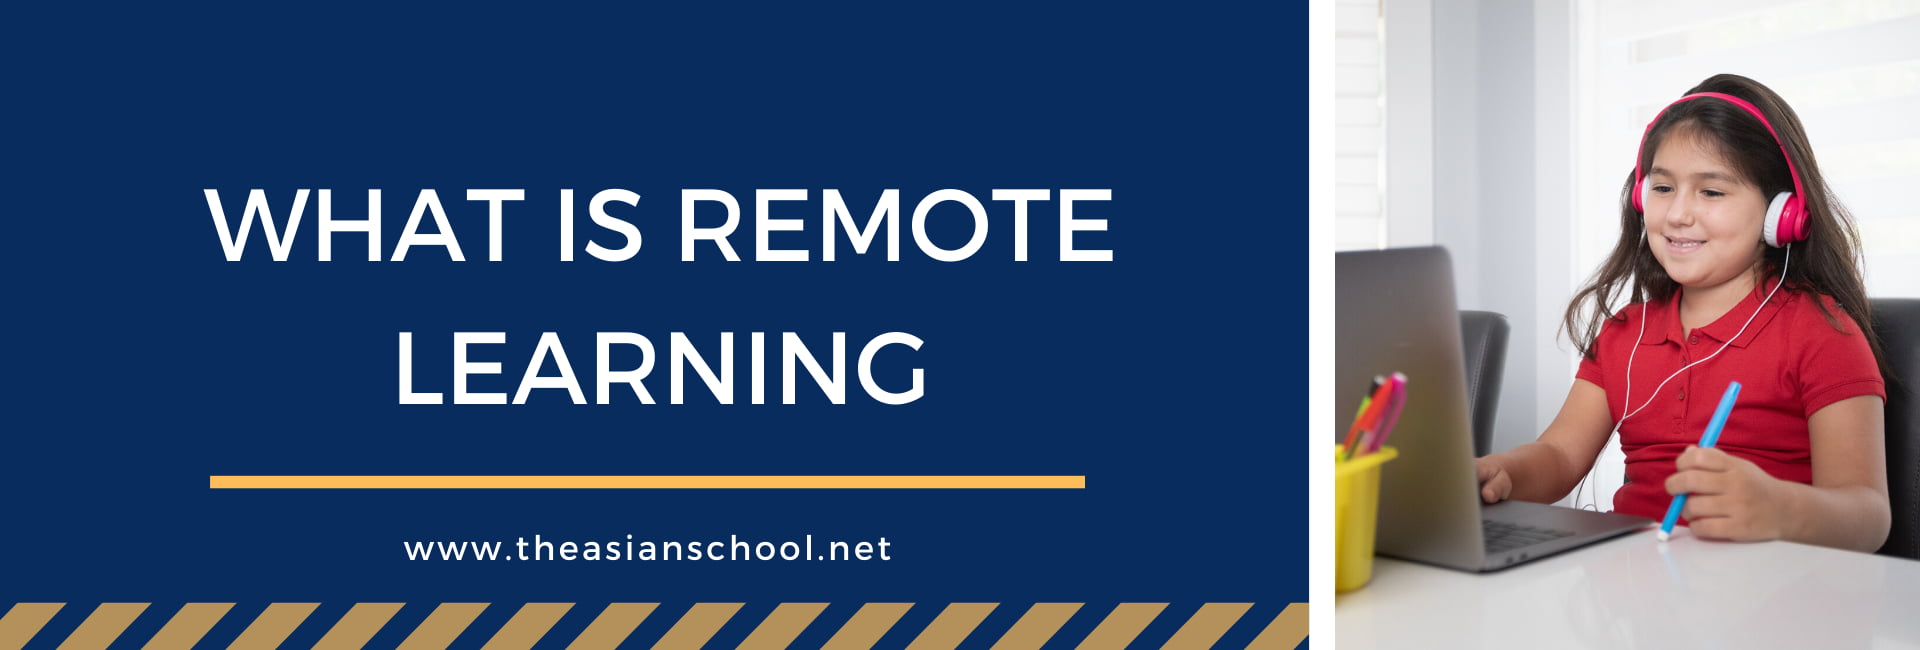 What Is Remote Learning